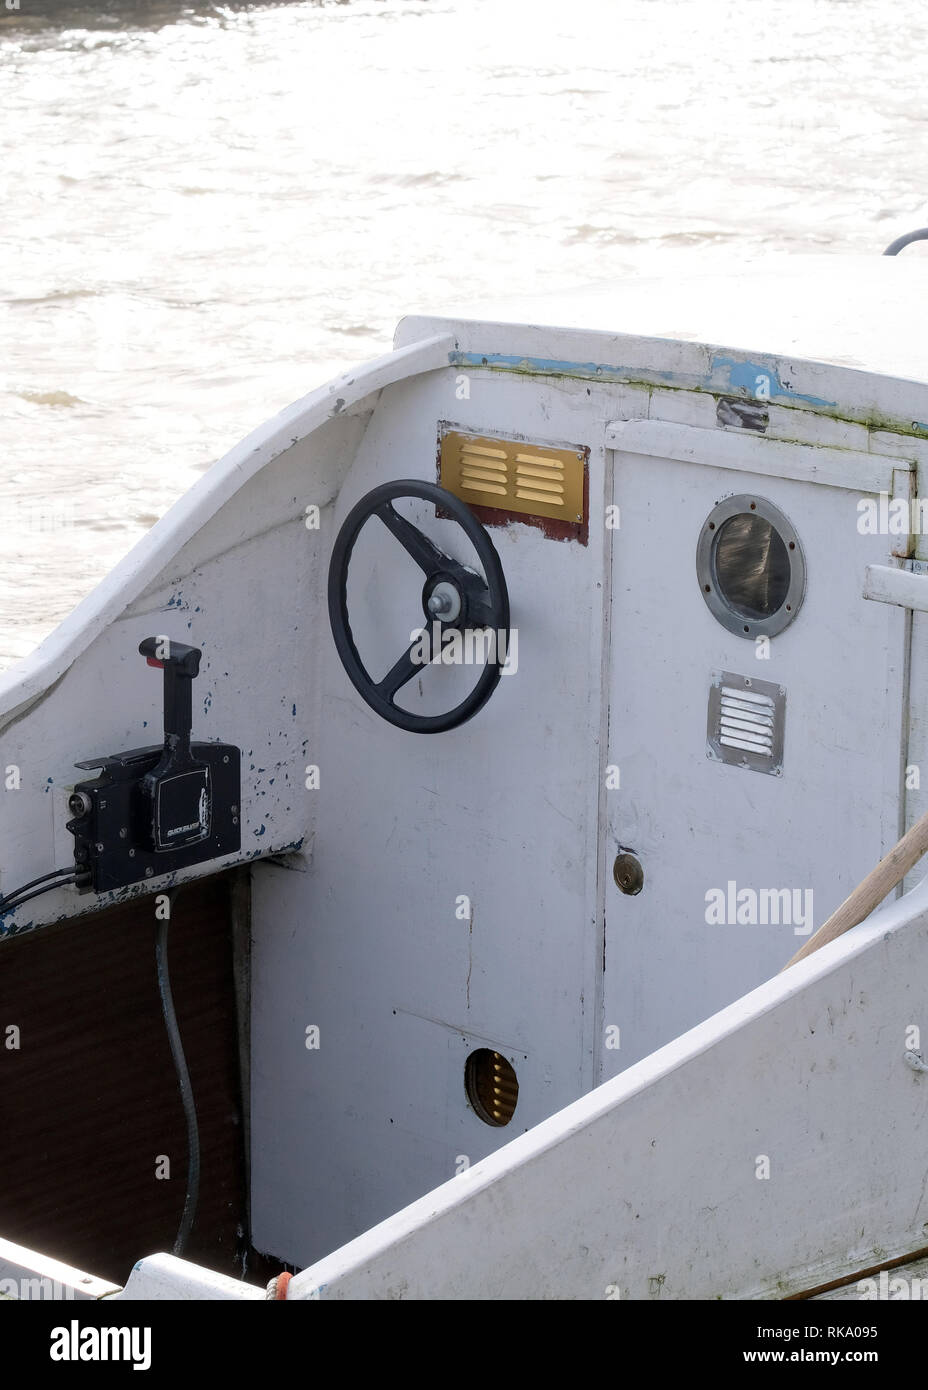 February 2019 - The controls of a small launch on the Gloucester and Sharpness Canal, near Slimbridge. Stock Photo